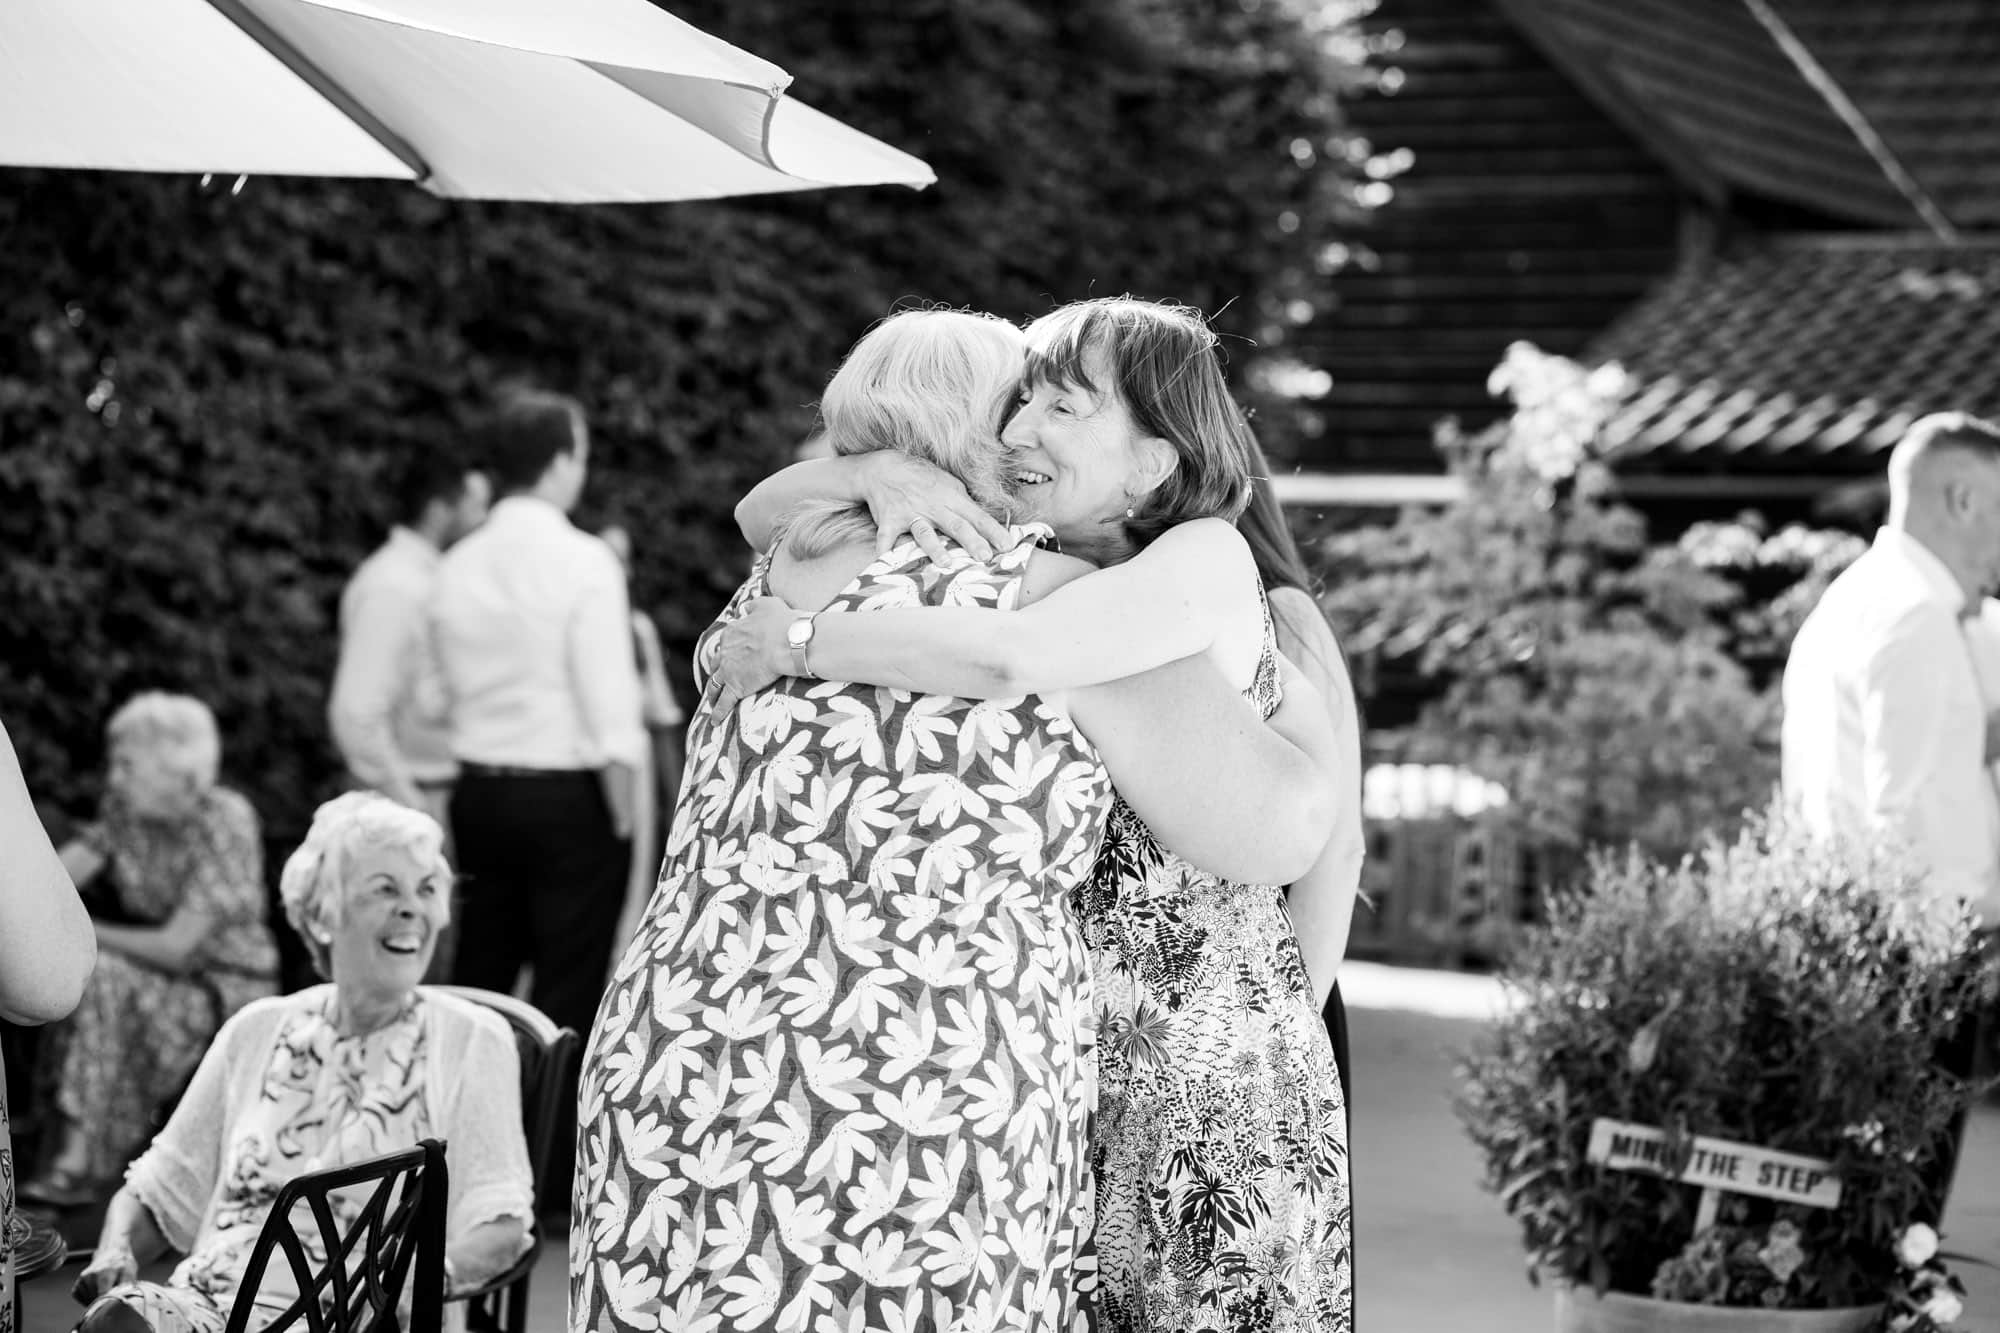 Mums hugging in black and white wedding photoshoot in Bromley